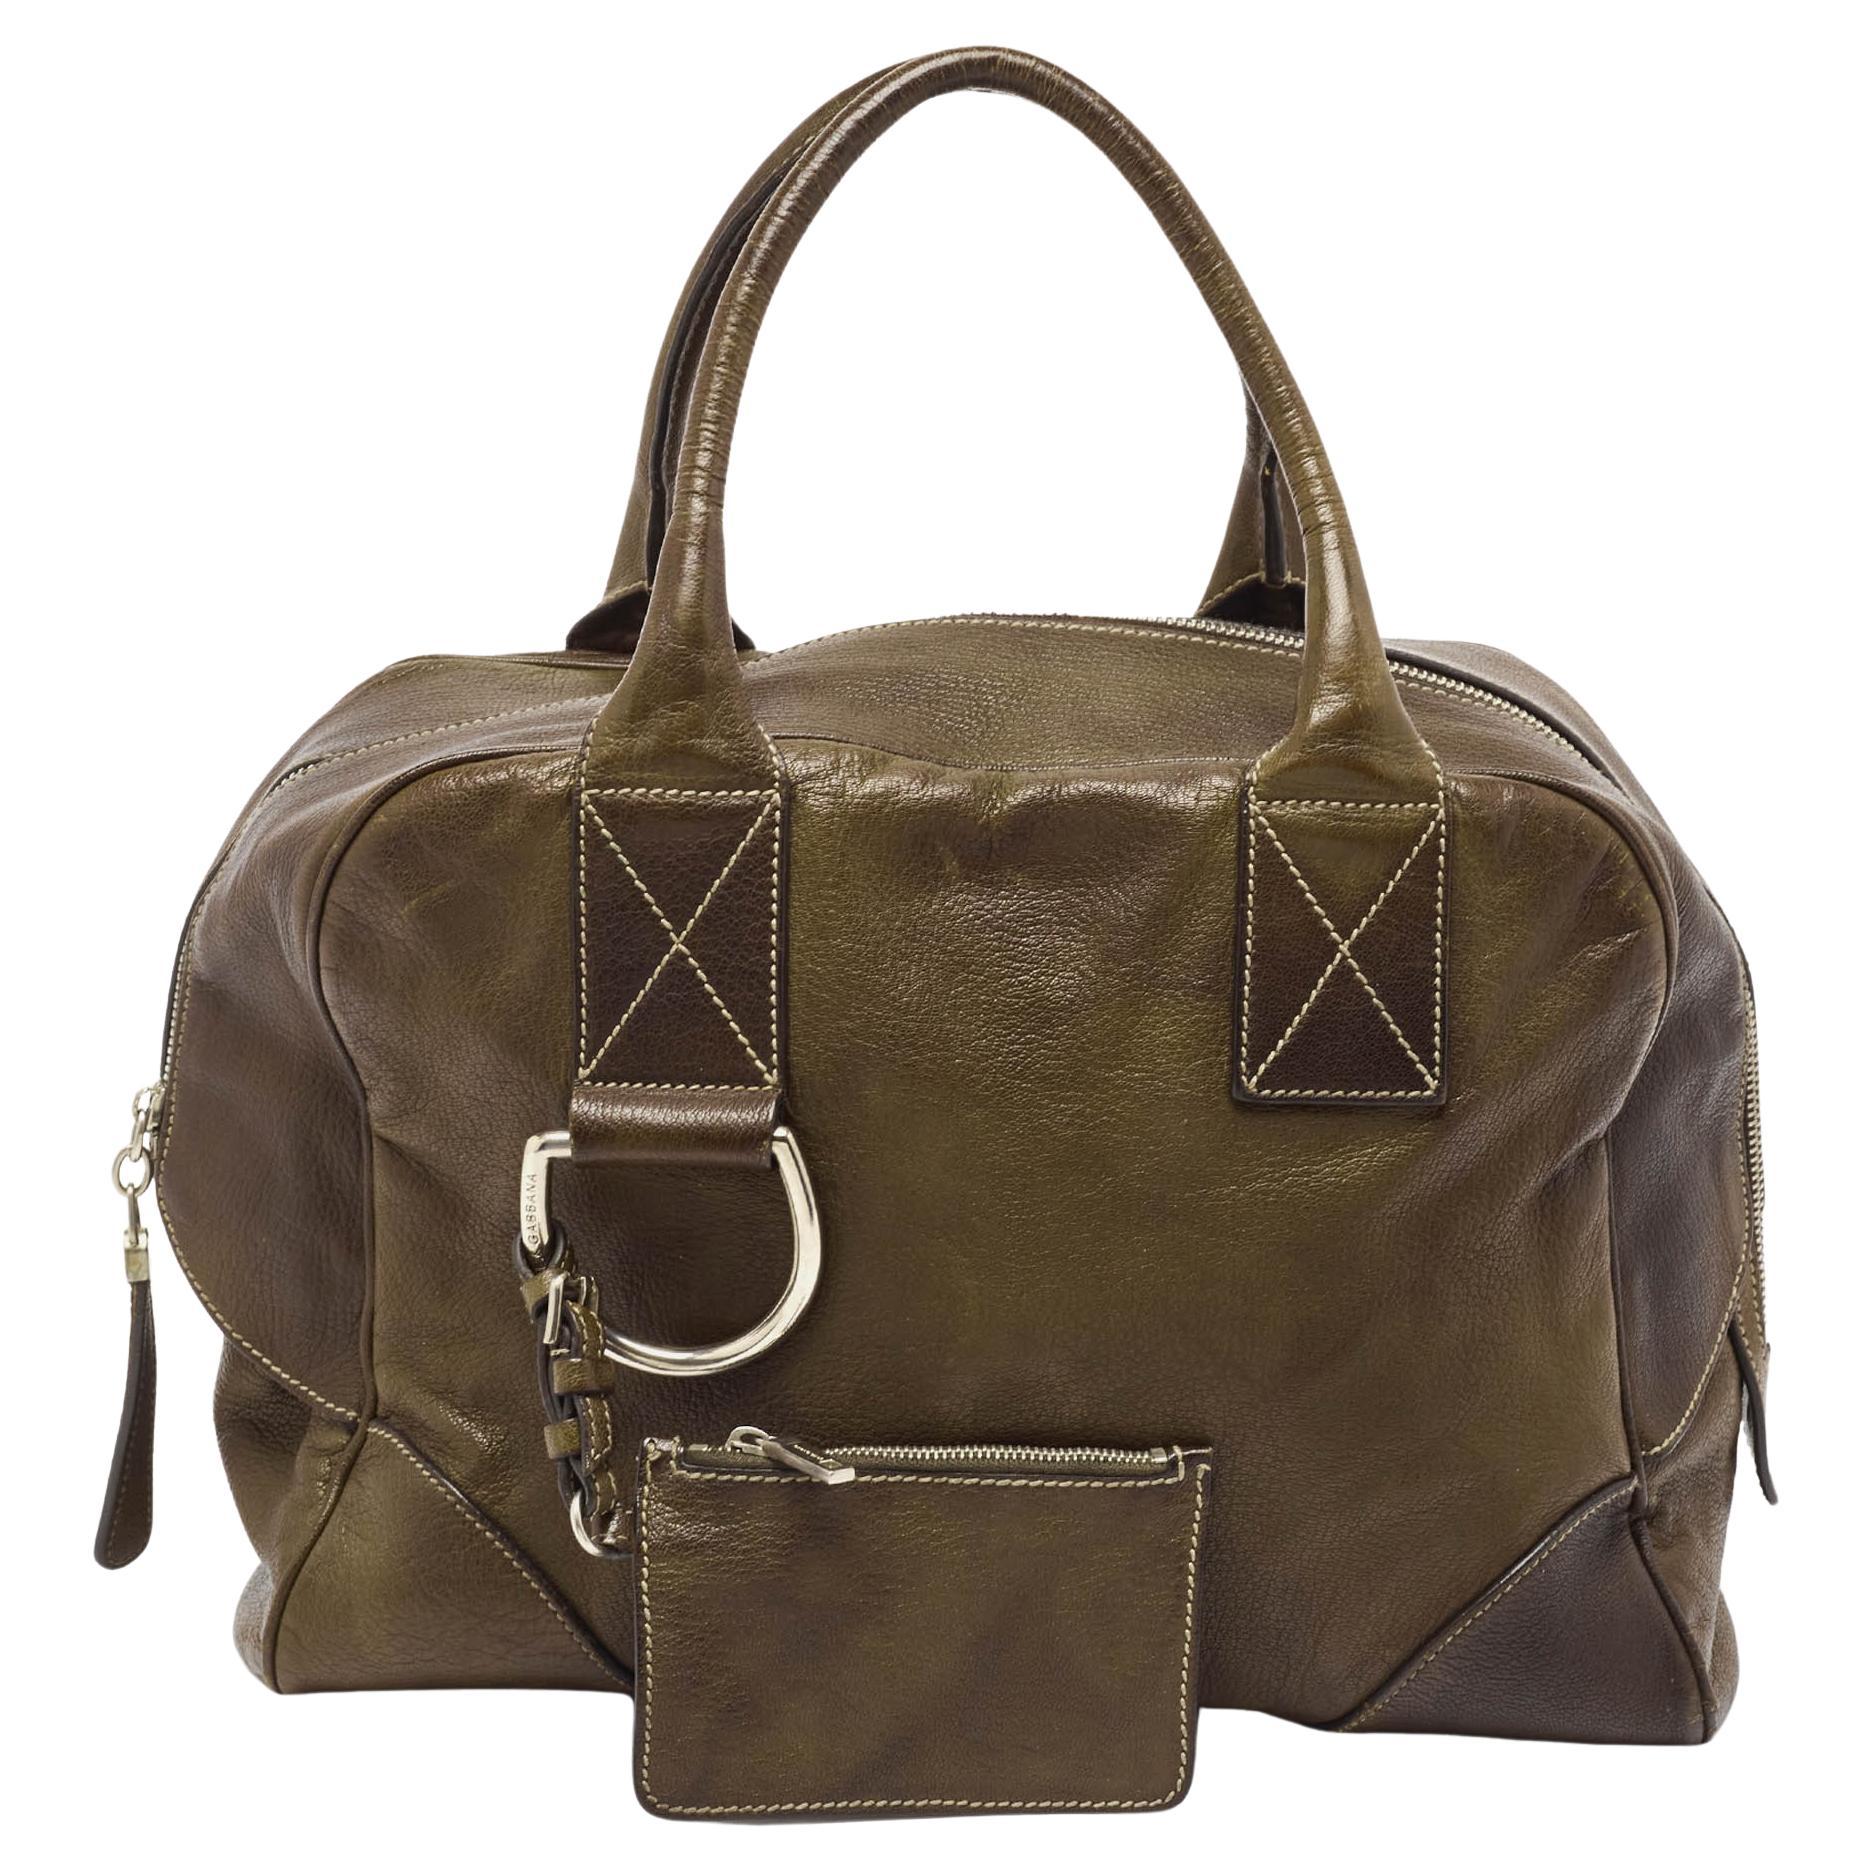 Dolce & Gabbana Olive Green Leather Miss Ice Satchel For Sale